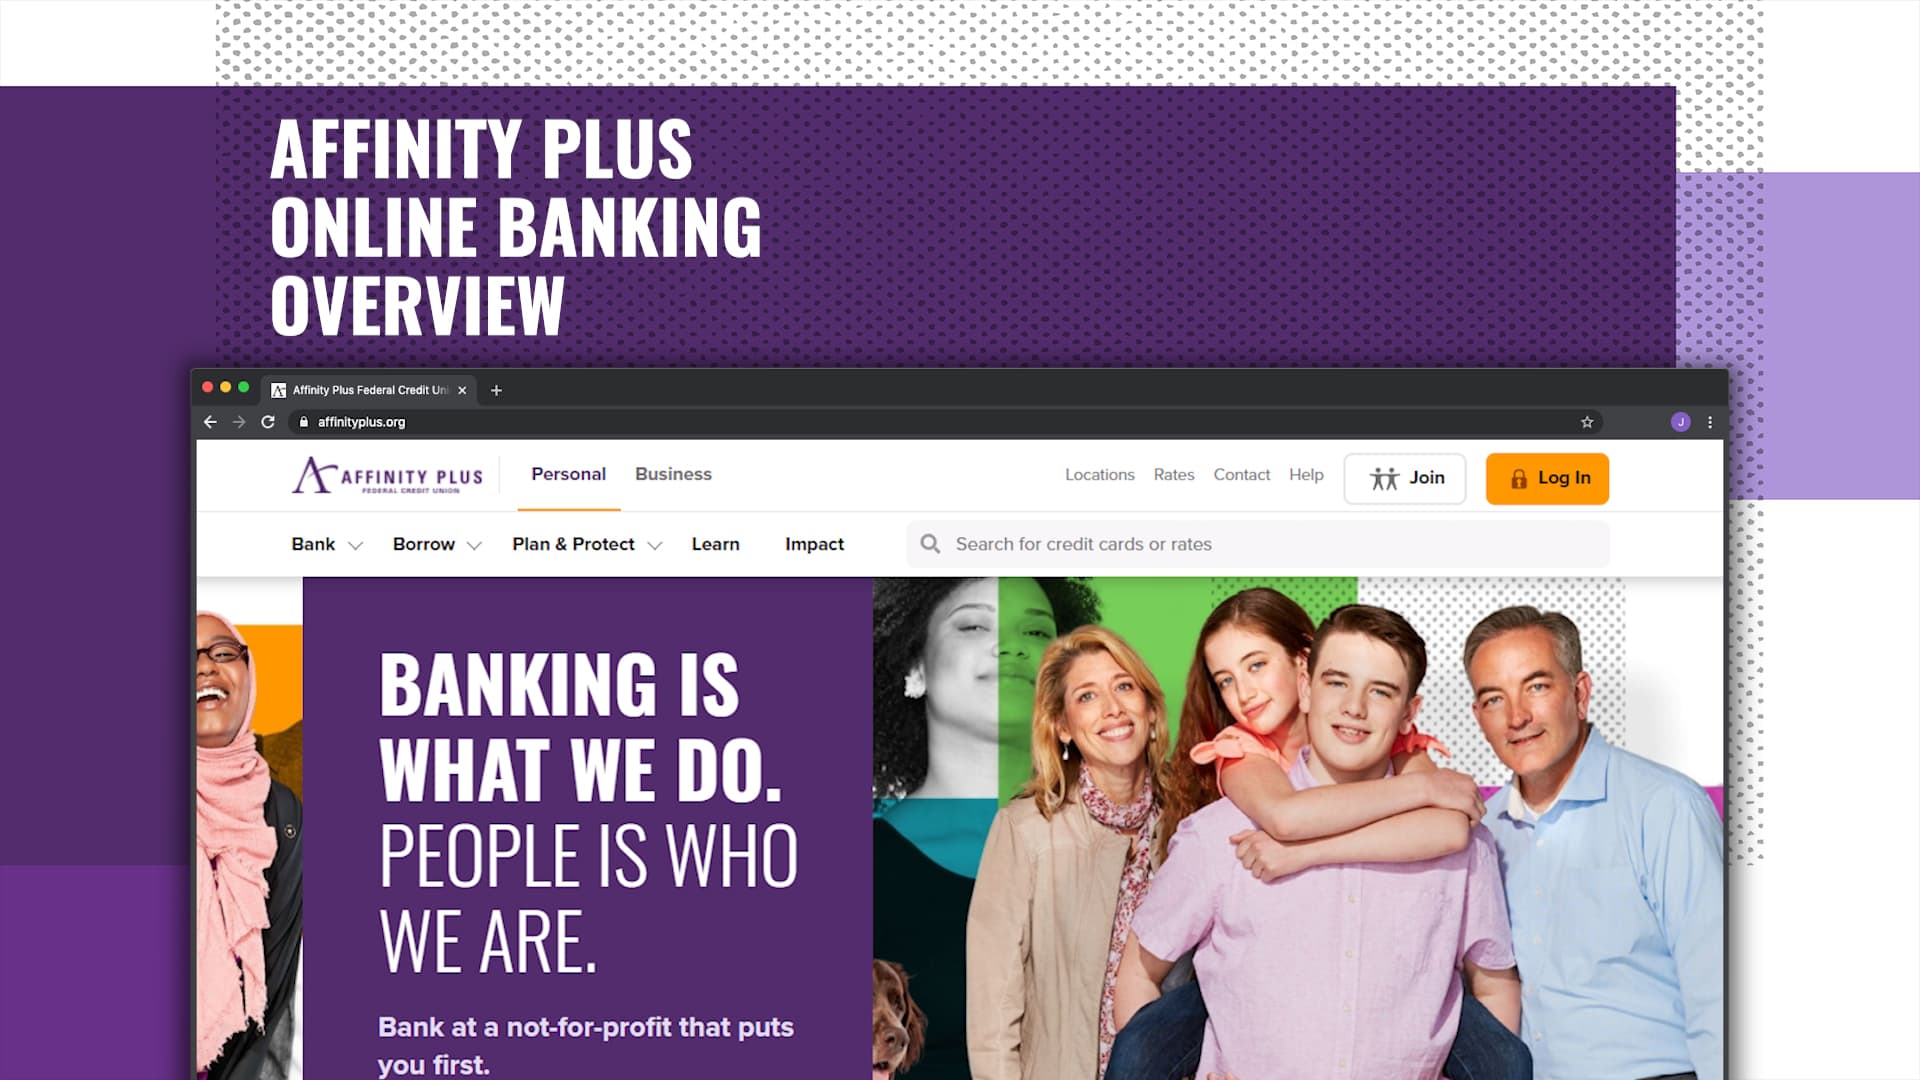 Affinity Plus Online Banking Overview